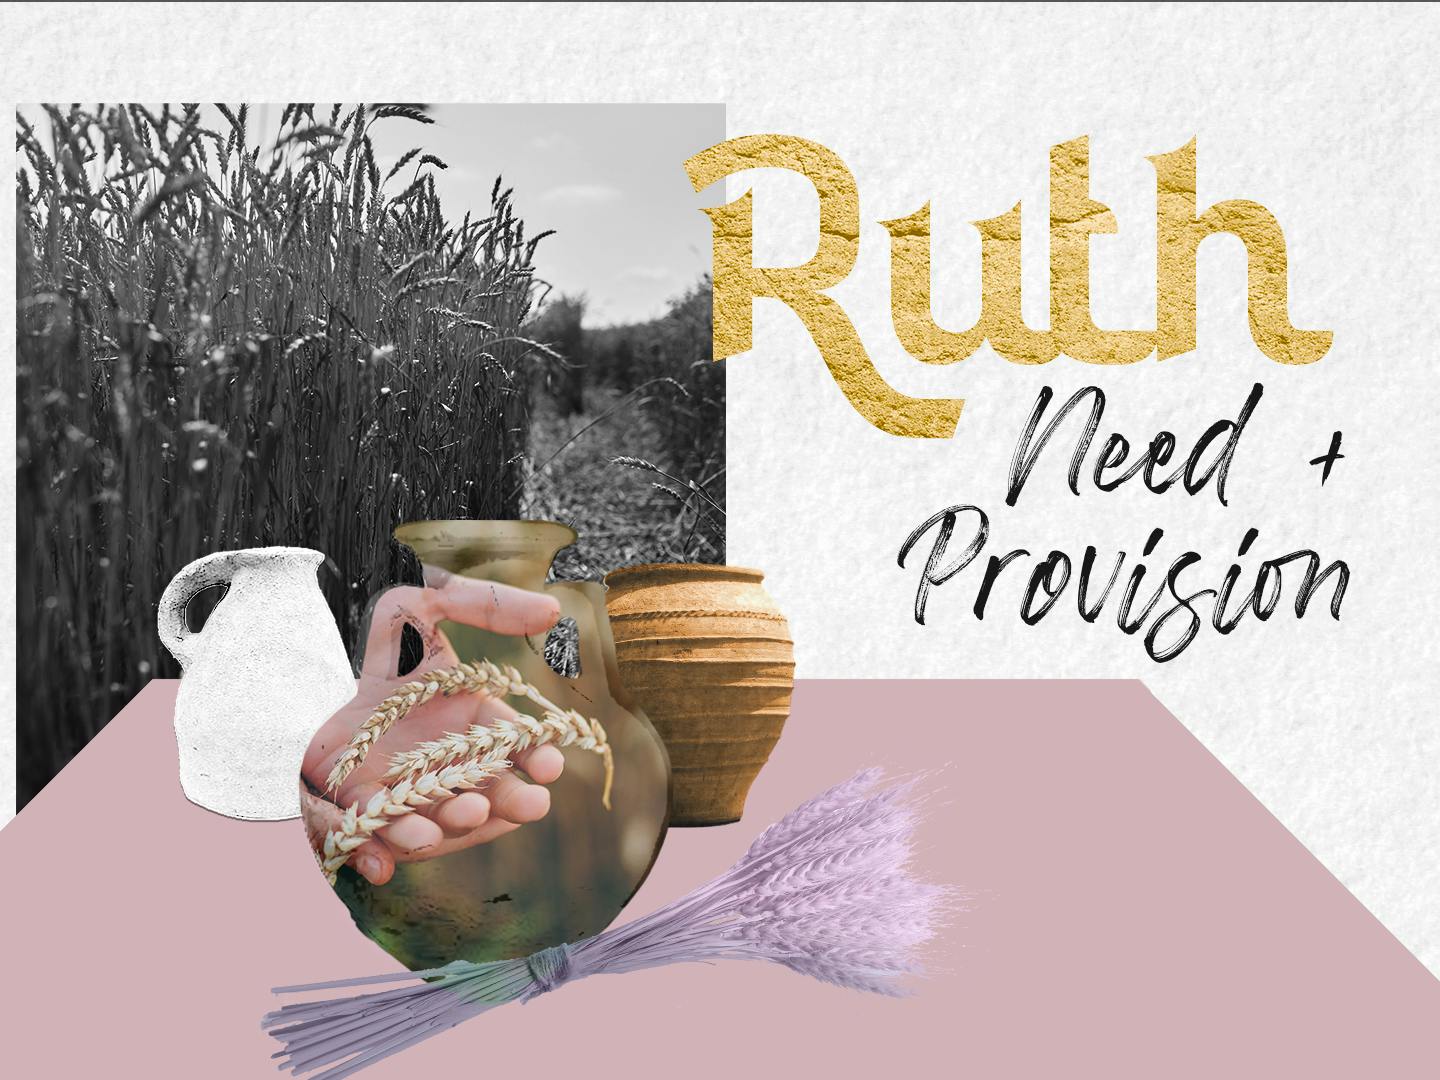 Ruth 2 - Need and Provision cover image